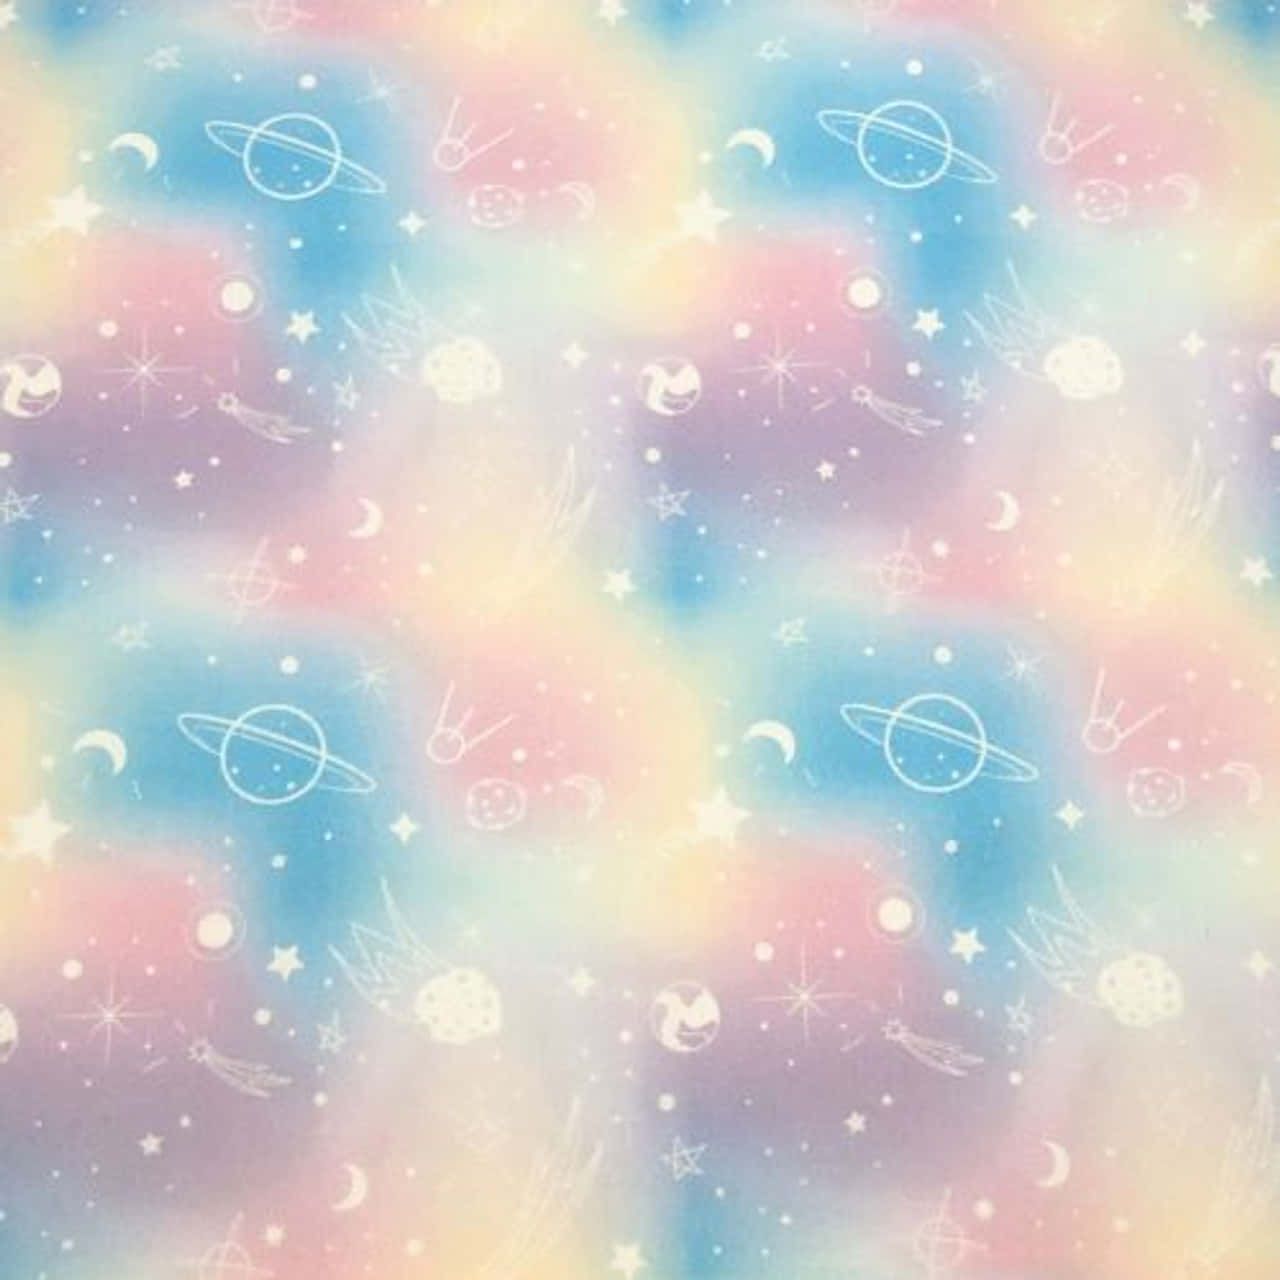 Explore the beauty of the Pastel Galaxy